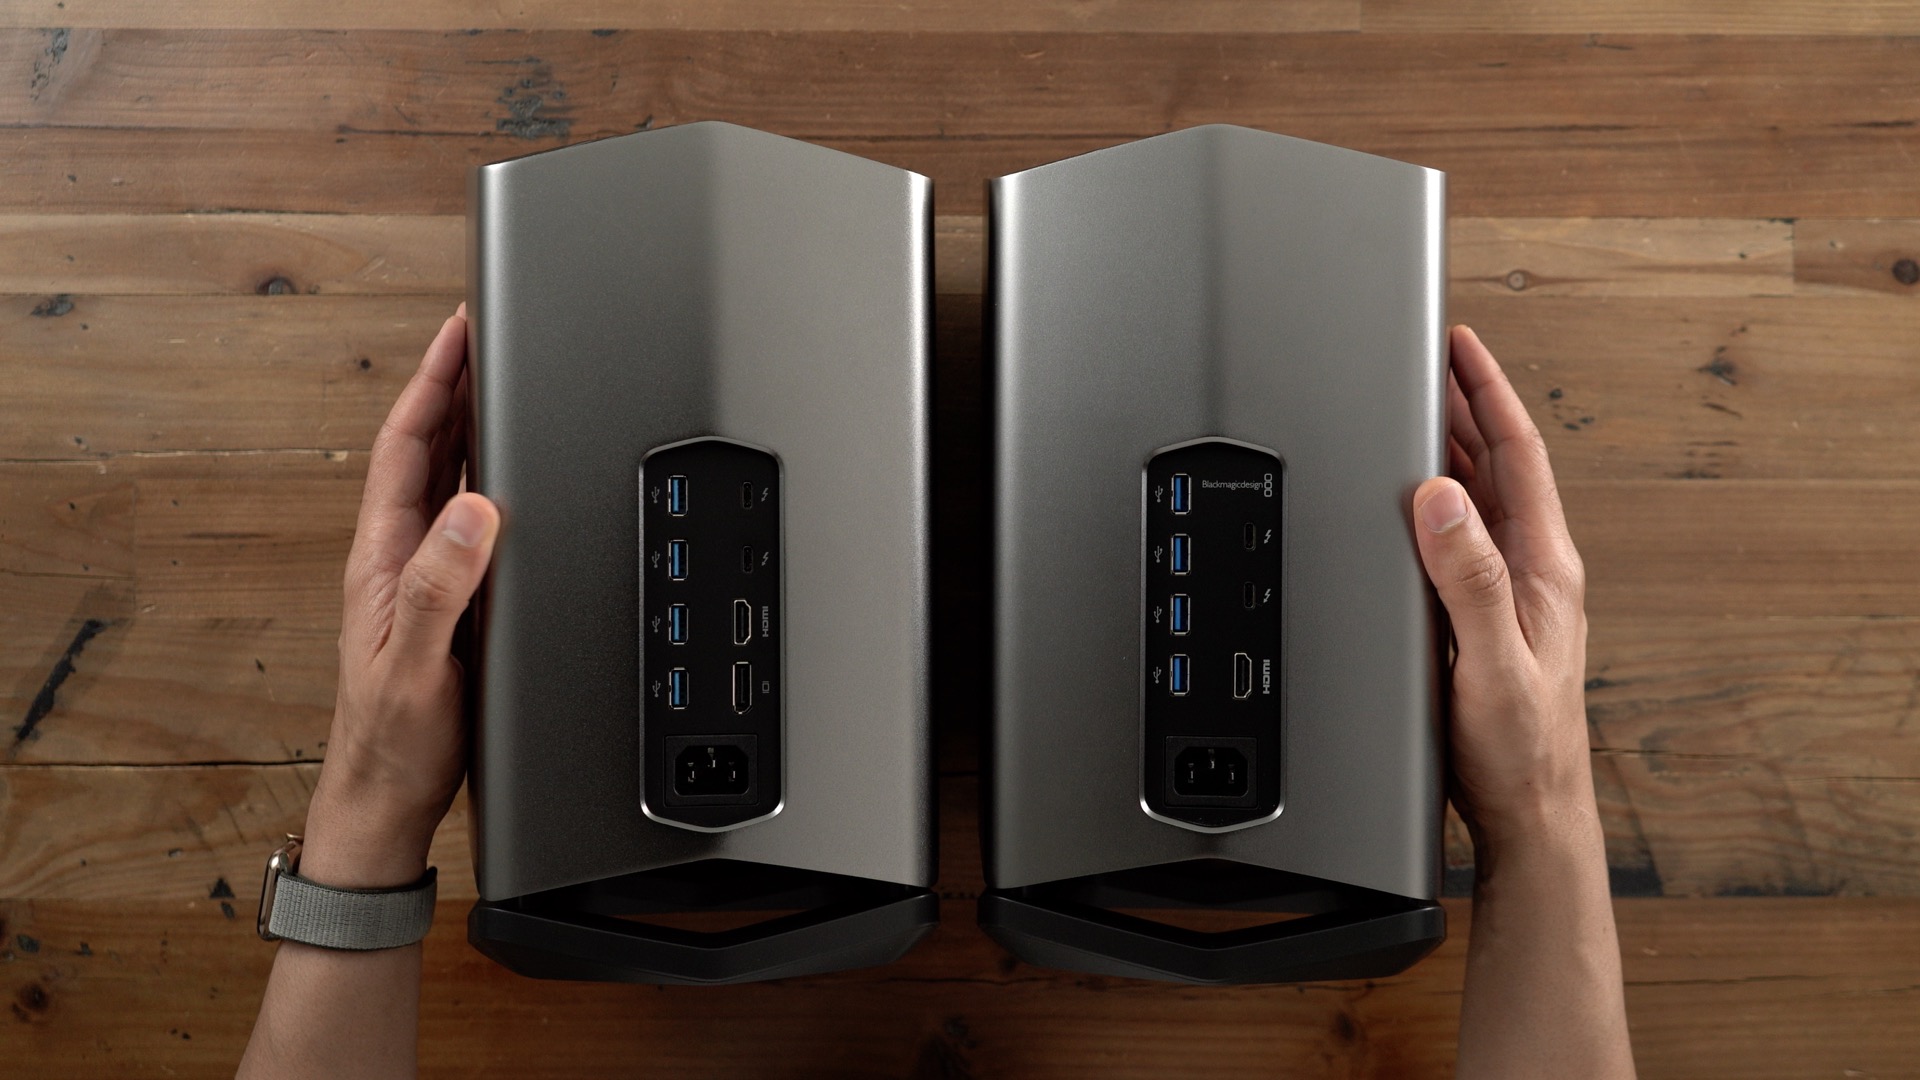 Review: Blackmagic eGPU Pro is more powerful and capable - 9to5Mac